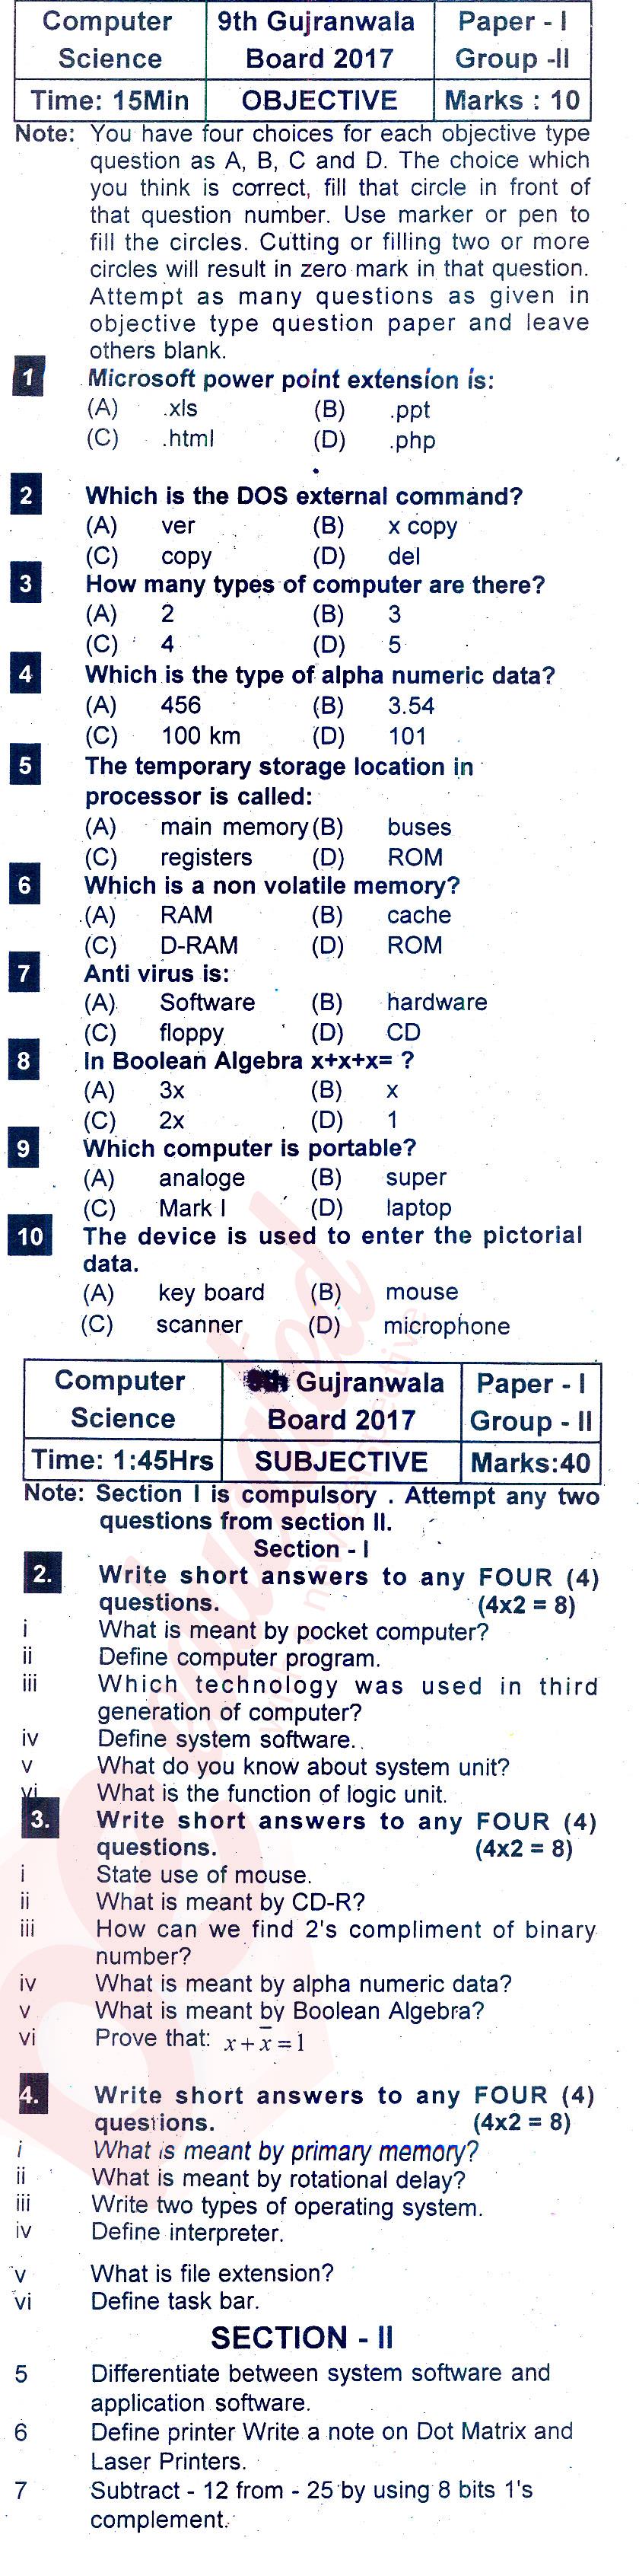 Computer Science 9th English Medium Past Paper Group 2 BISE Gujranwala 2017